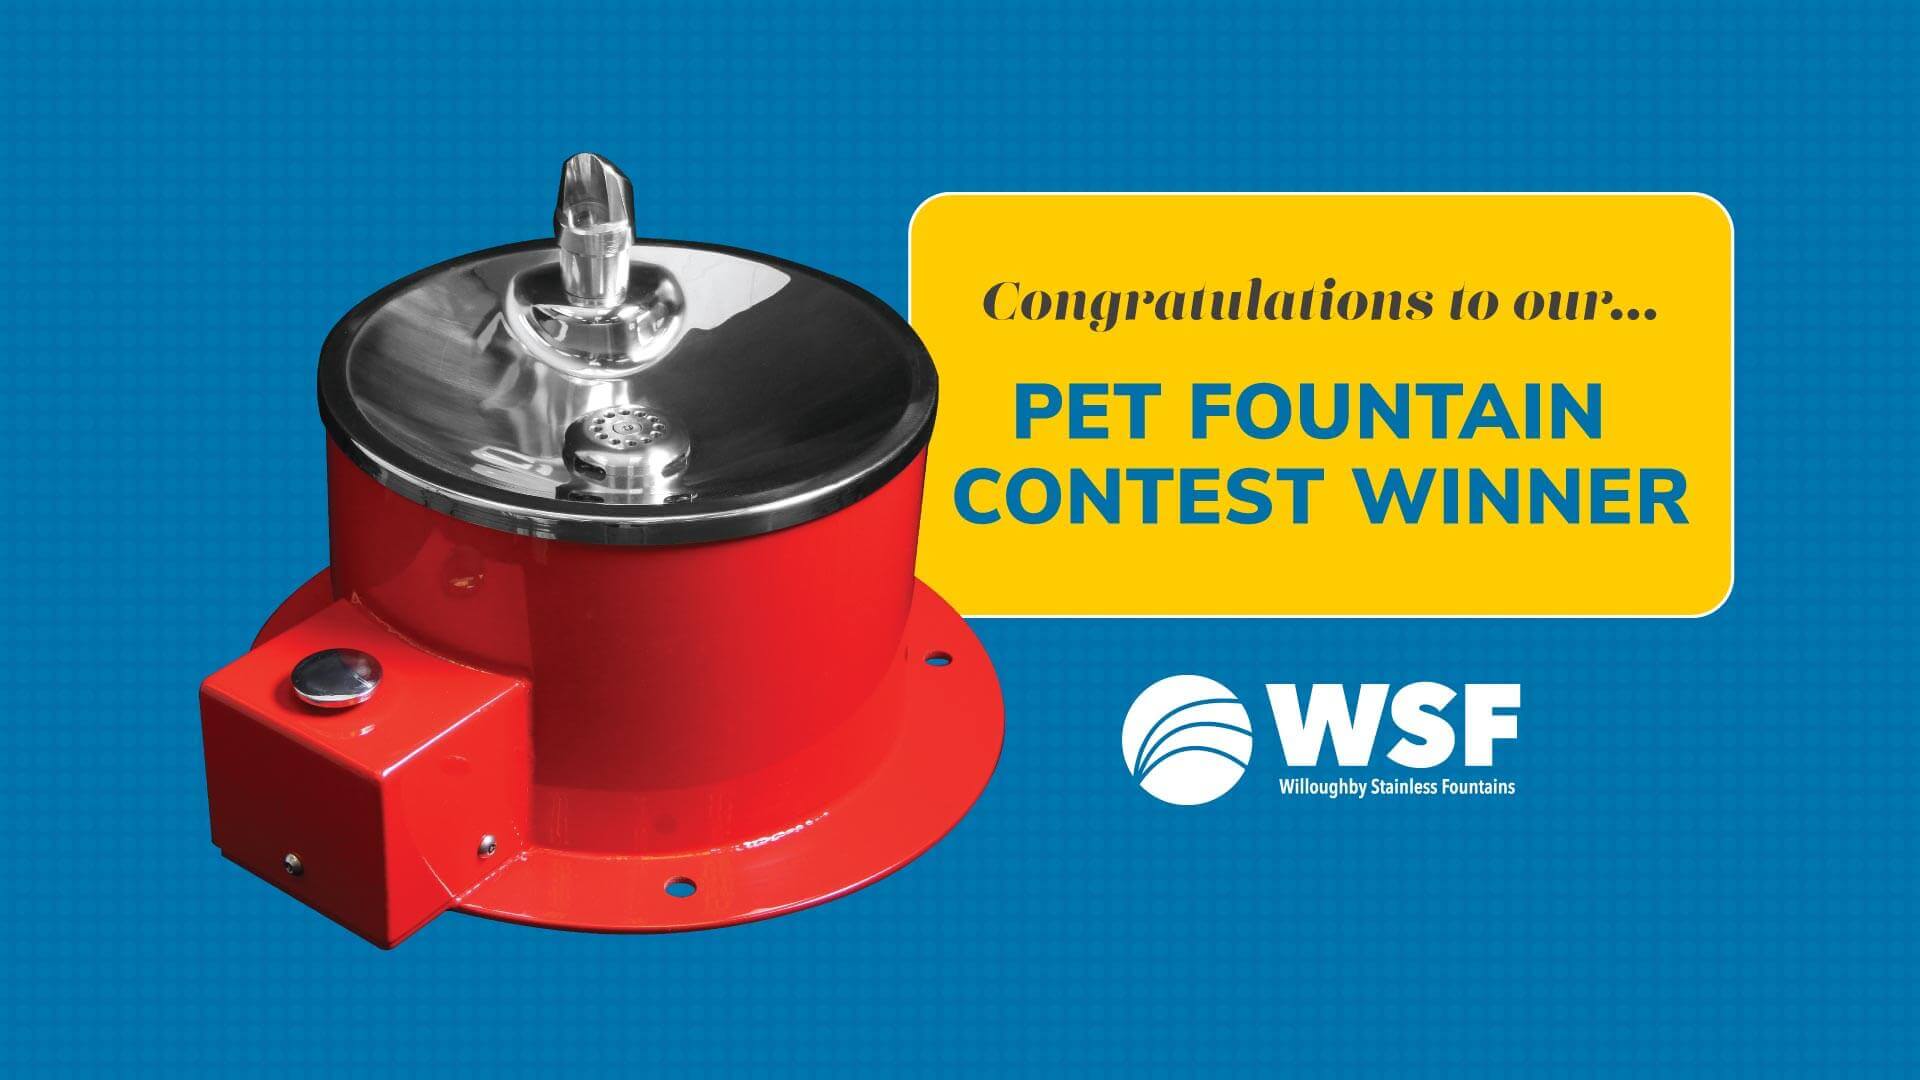 Congratulations to our Pet Fountain Contest Winner